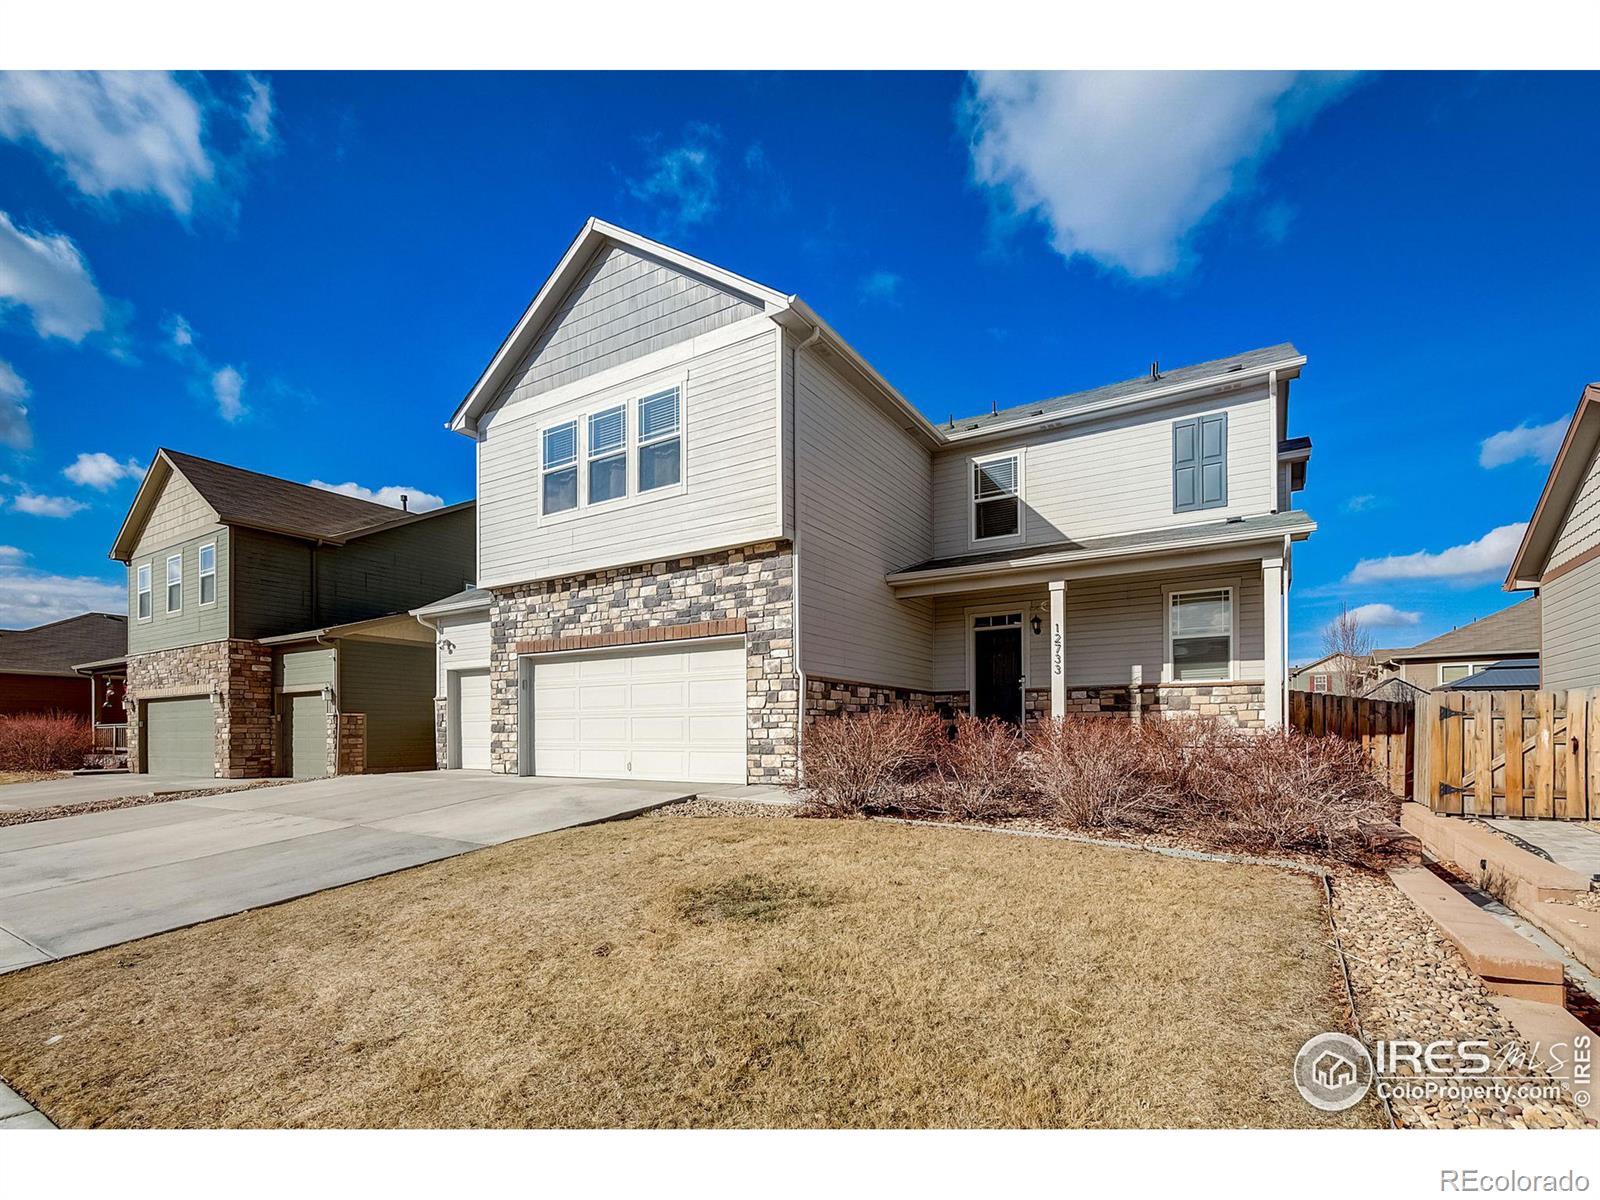 12733 e 104th drive, Commerce City sold home. Closed on 2024-04-18 for $550,000.